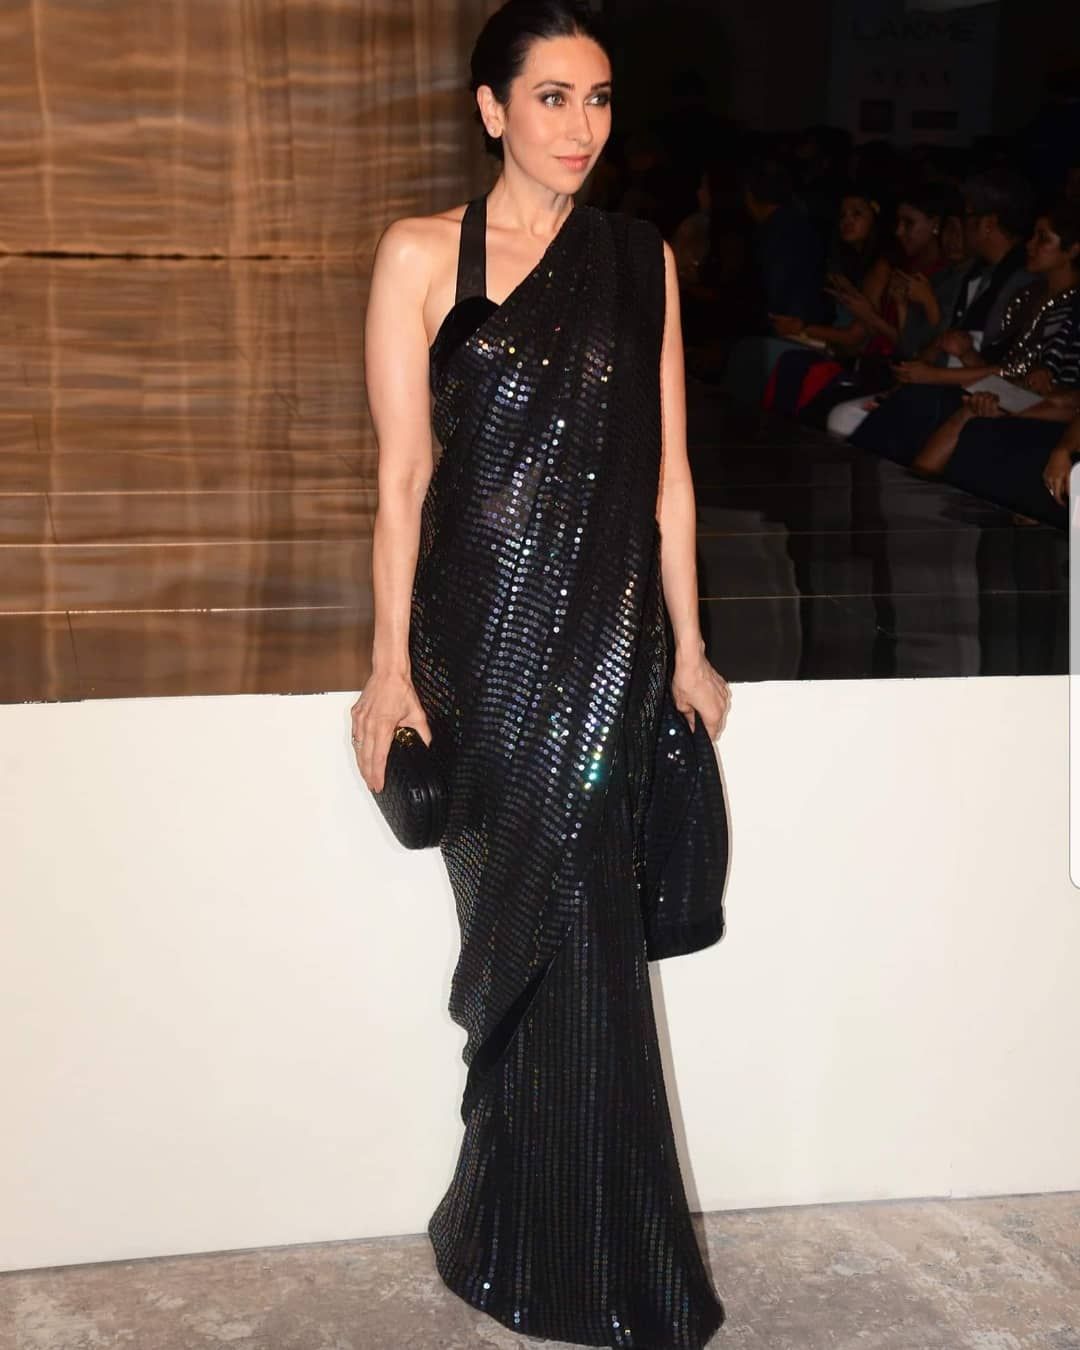 Karishma Kapoor Hot Sex Photos - From Behind Her Eyes To Bollywood: Karisma Kapoor, Alia Bhatt & More â€”  Check Out Bollywood's Major Monochromatic Style Moments